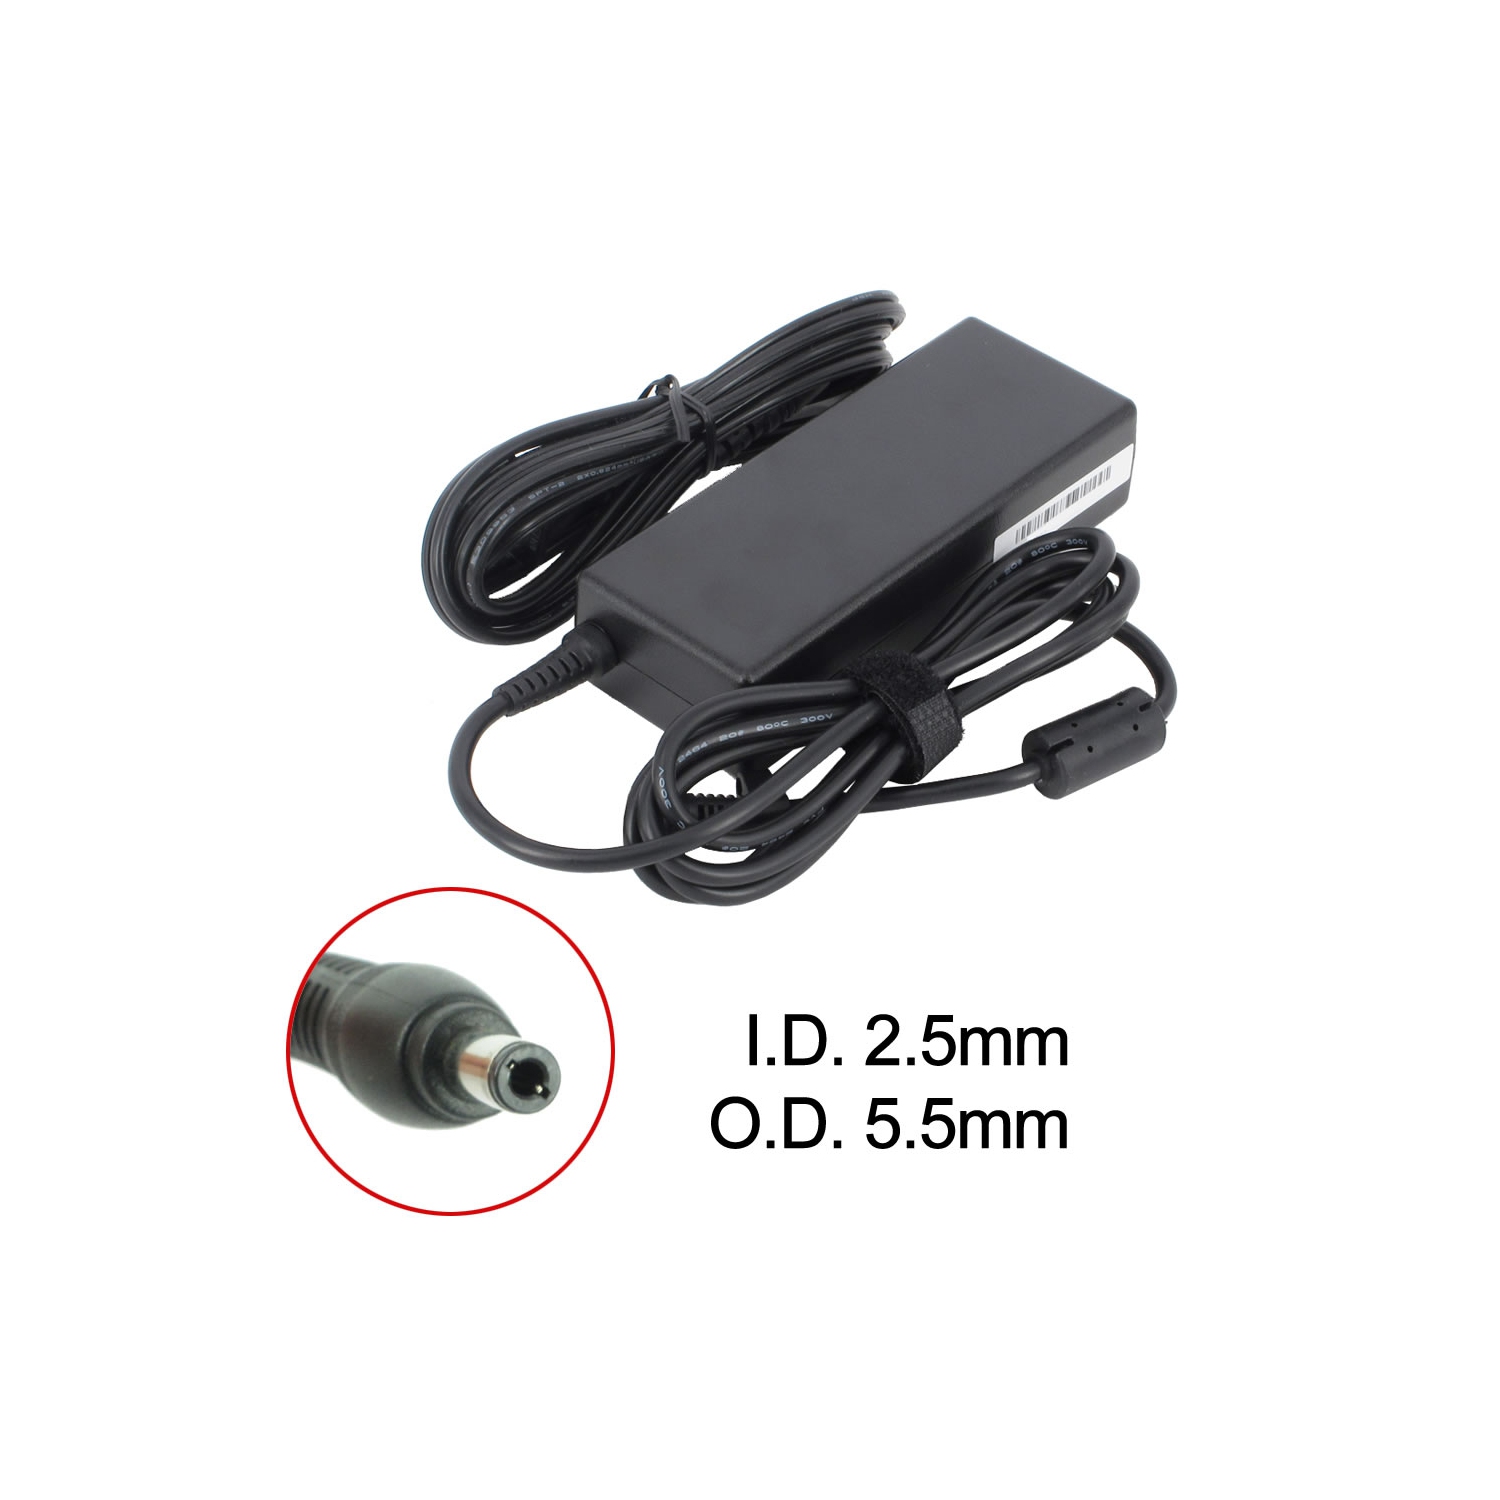 New Laptop AC Adapter for Acer Ferrari 4004, 0220A1990, 1528569, 90-N00PW5200T, ADP-65 HB BBCF, AZ121508, PA-1900-66